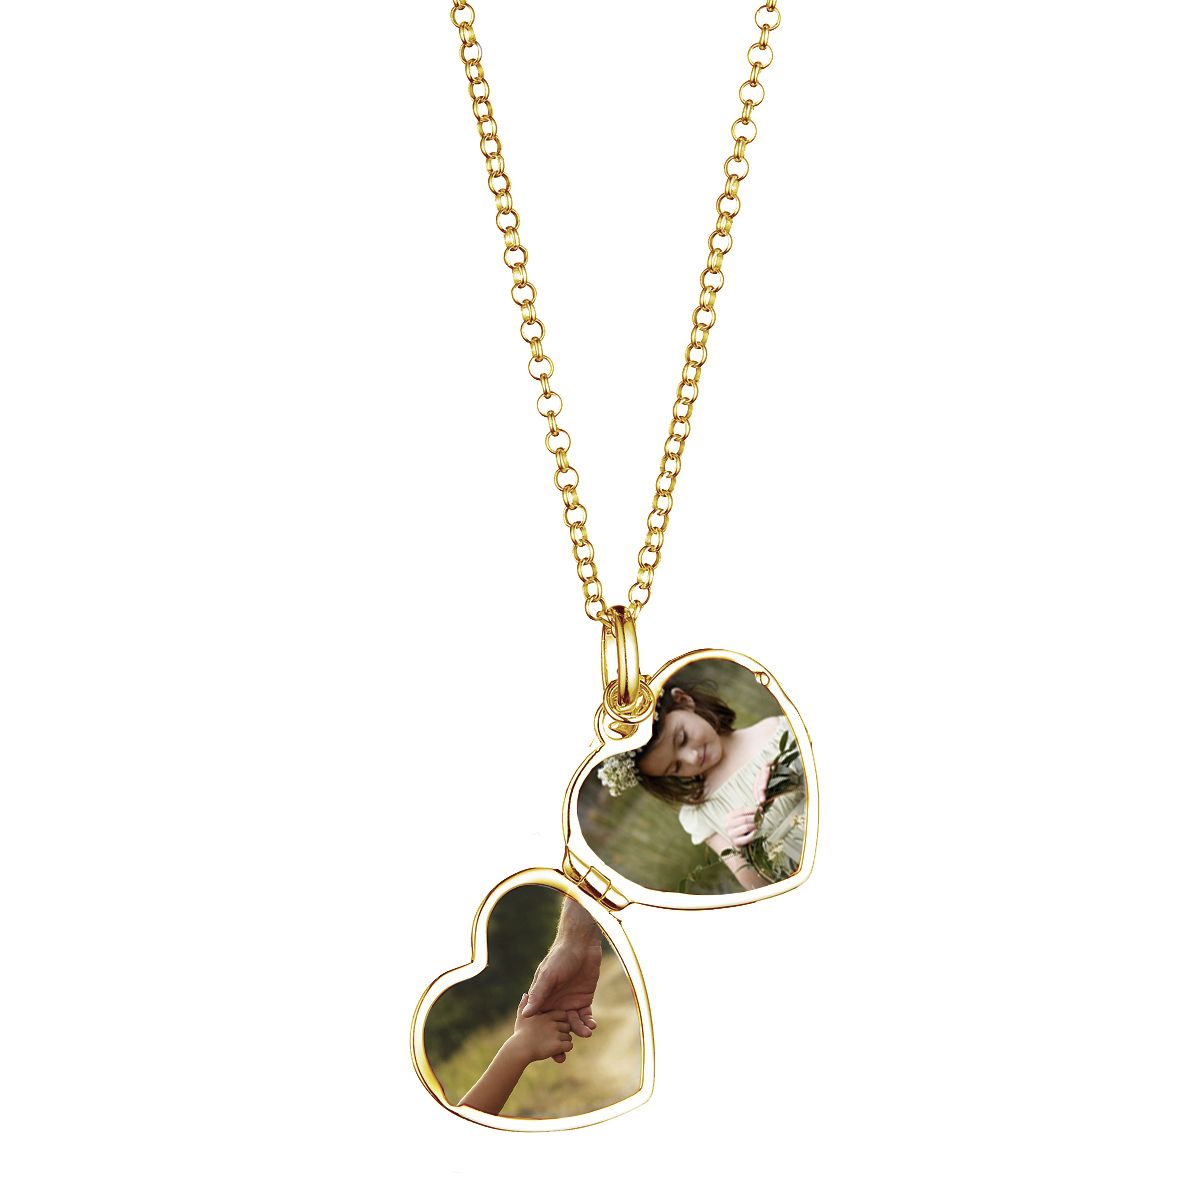 Personalized Gold Vermeil Small Heart ‎Diamond Locket Necklace